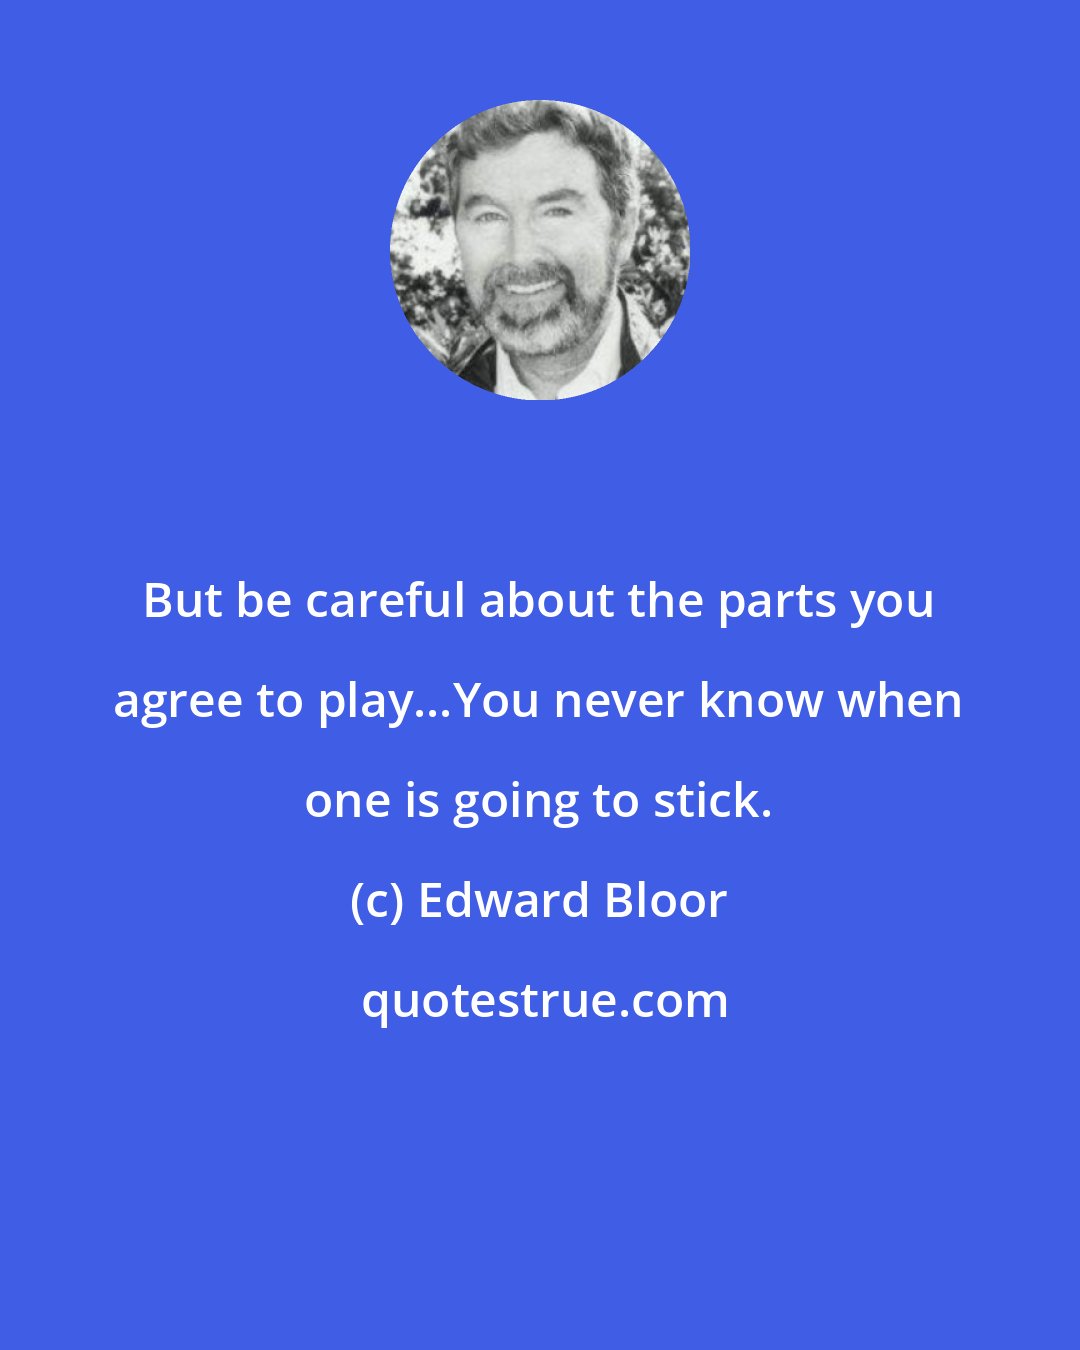 Edward Bloor: But be careful about the parts you agree to play...You never know when one is going to stick.